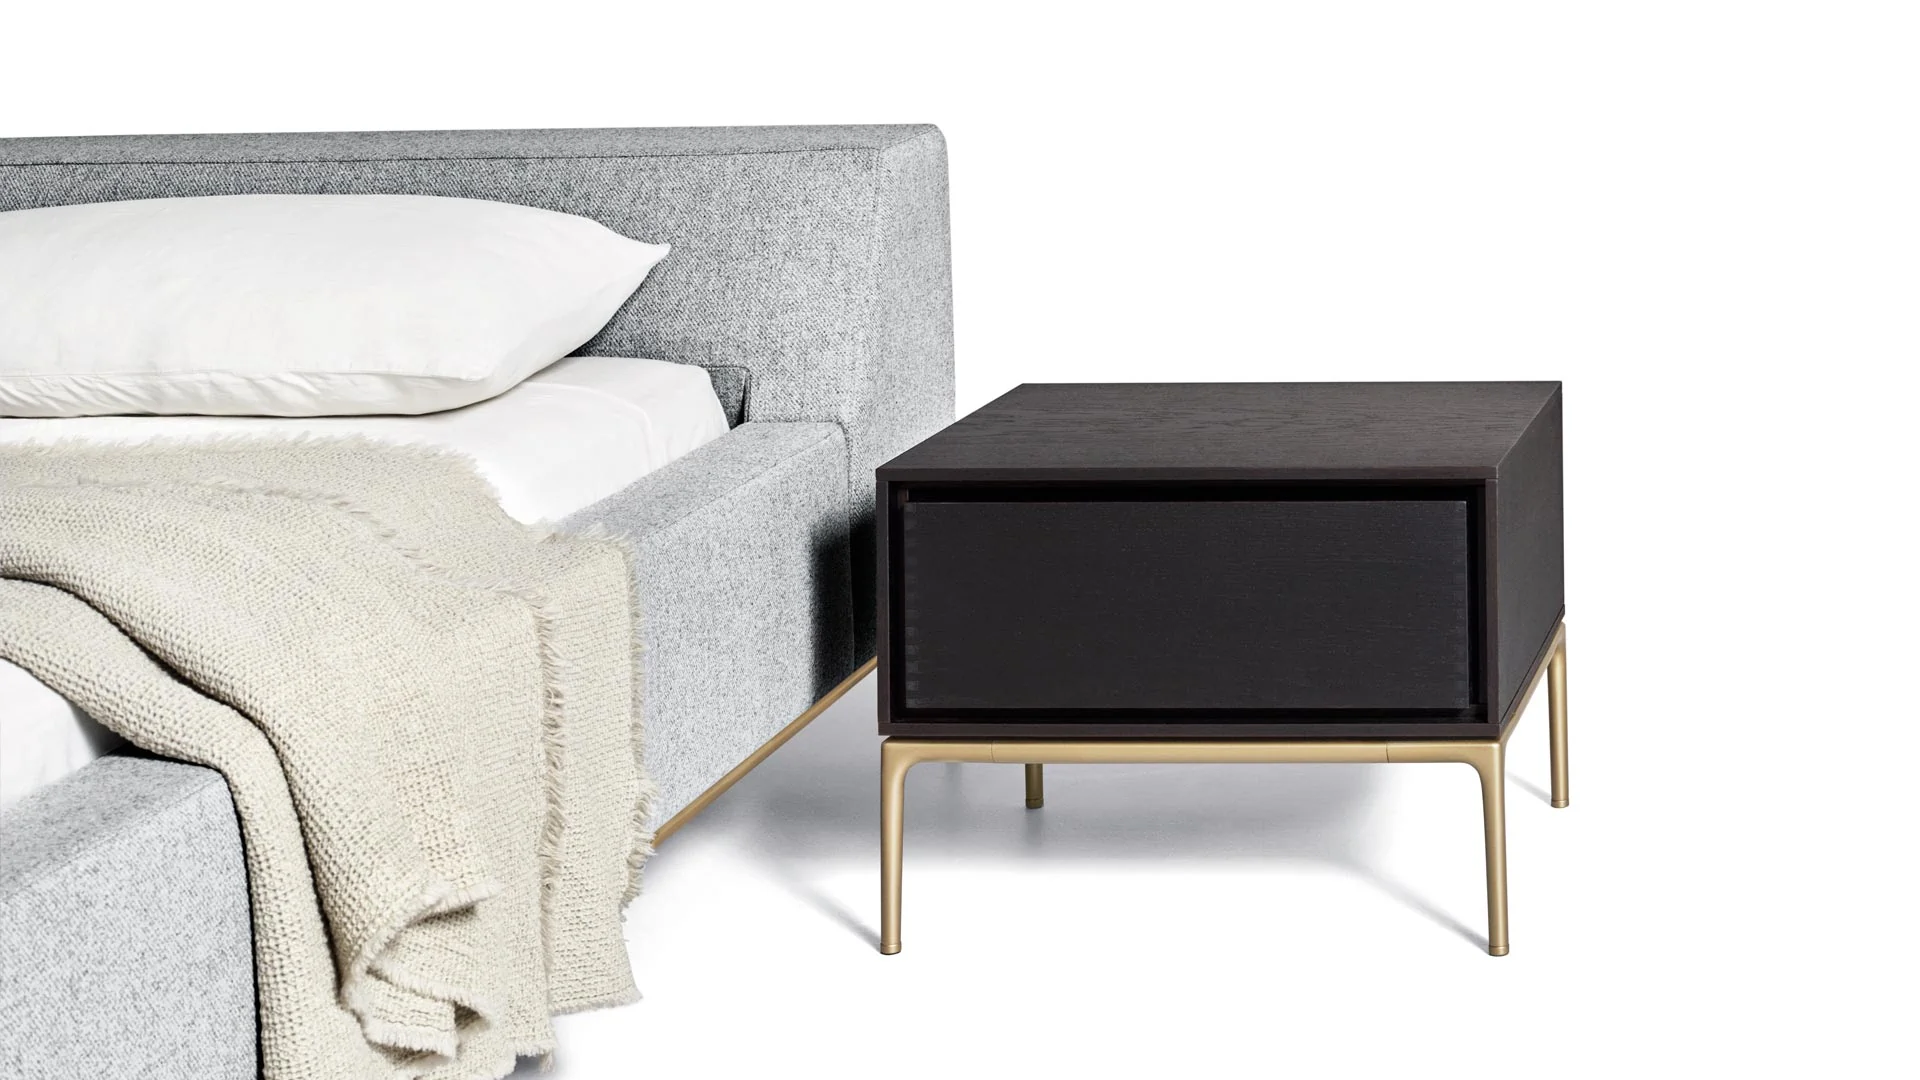 Time Trip For Memories – Bed Side Table ēdition